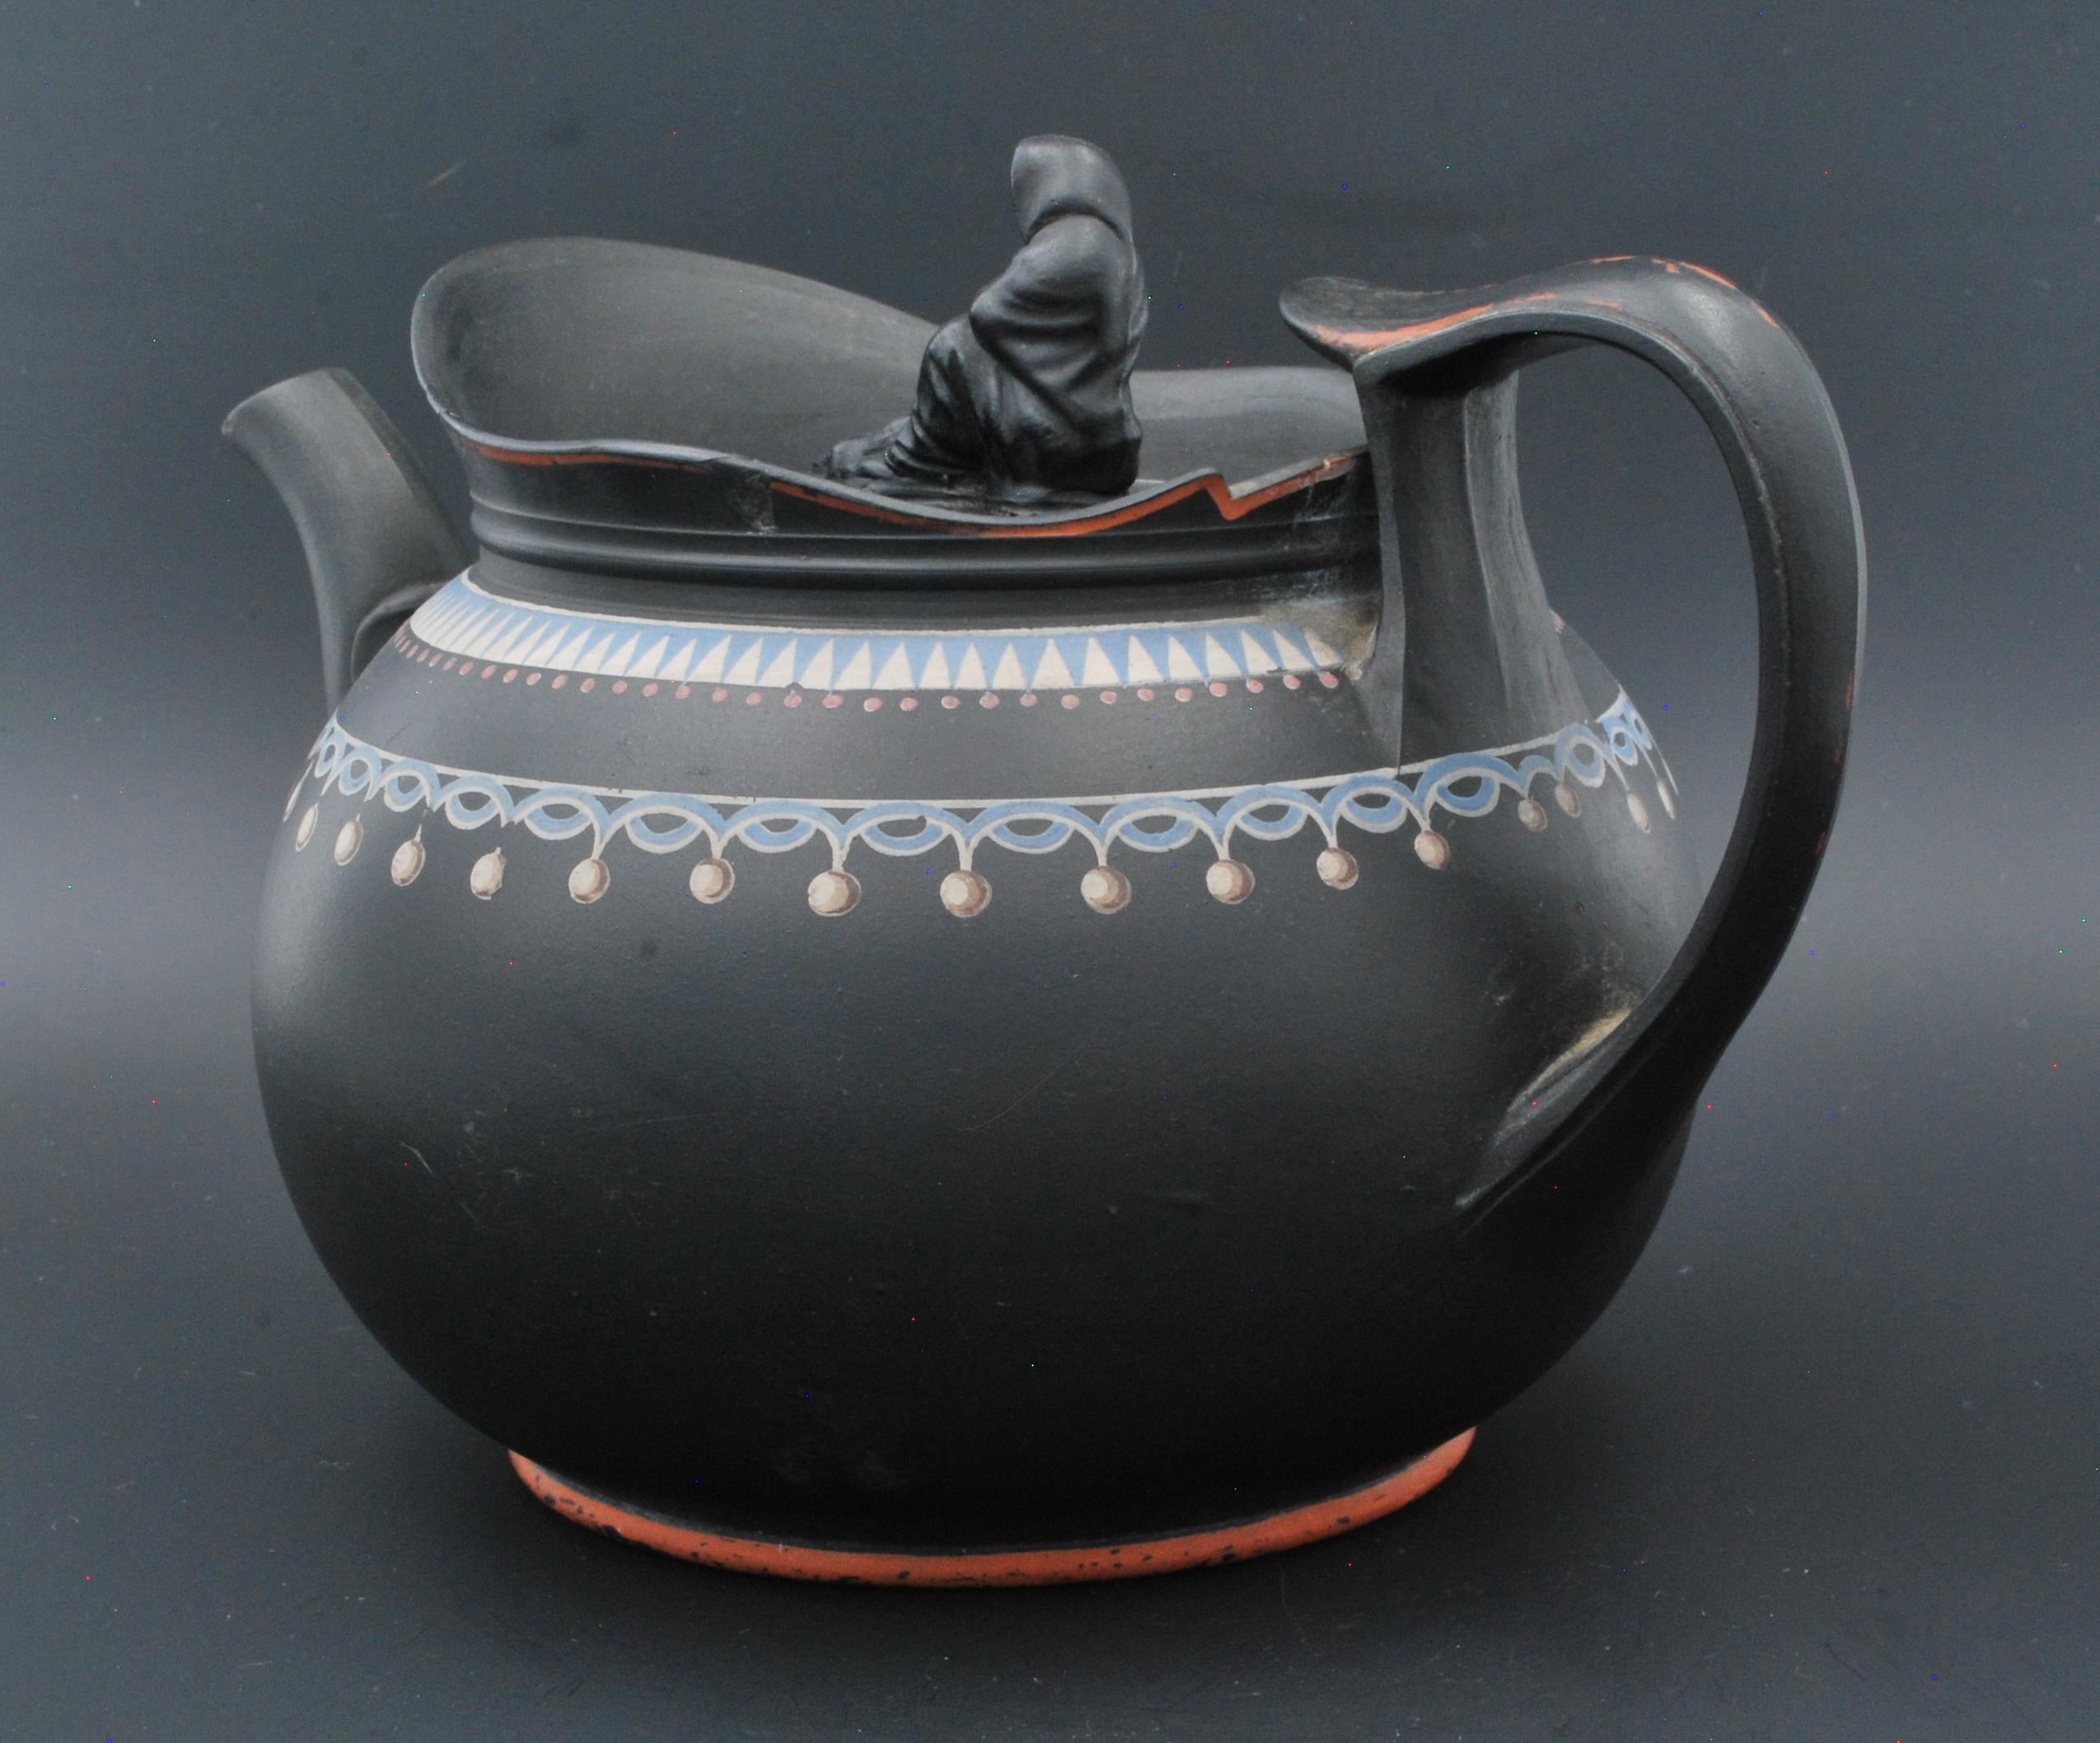 Black Basalt Teapot with Enamel Decoration, Probably Spode C1800 In Excellent Condition For Sale In Melbourne, Victoria